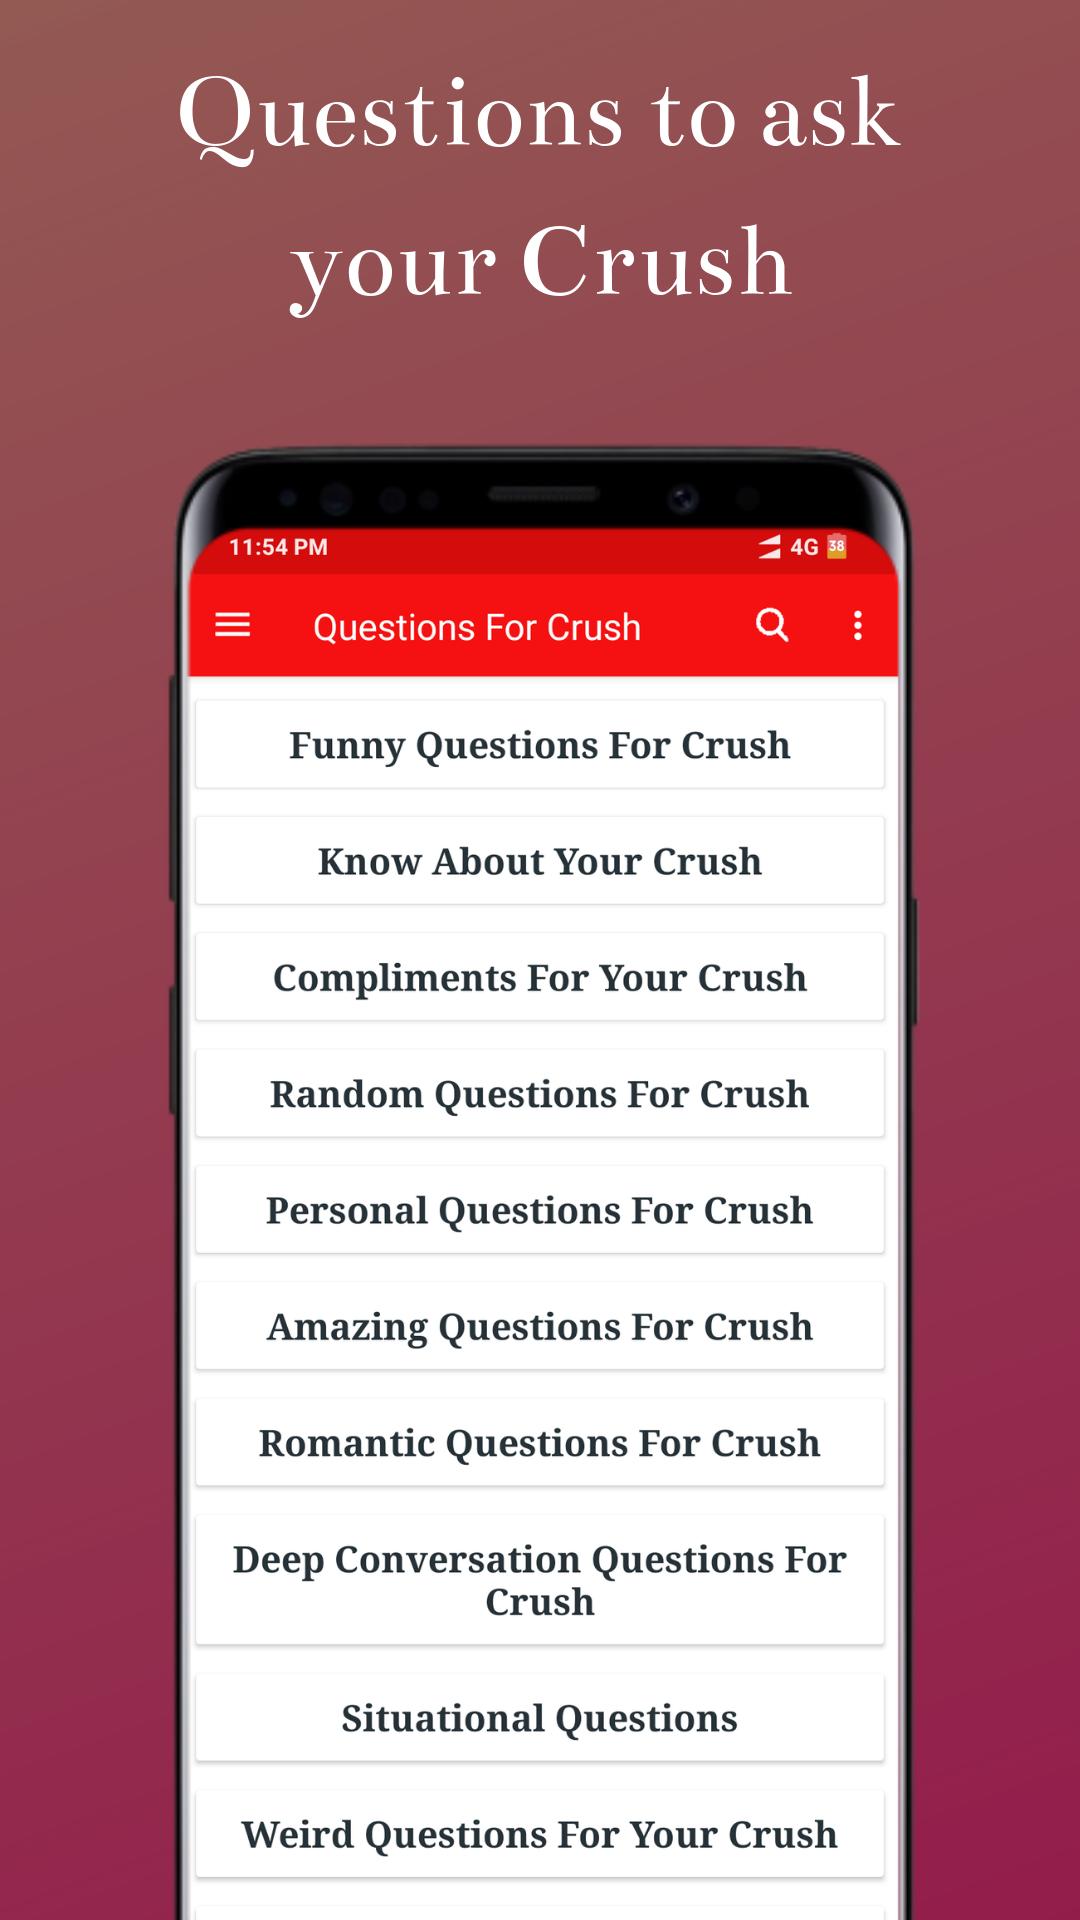 Crush ask questions to a 71 Best